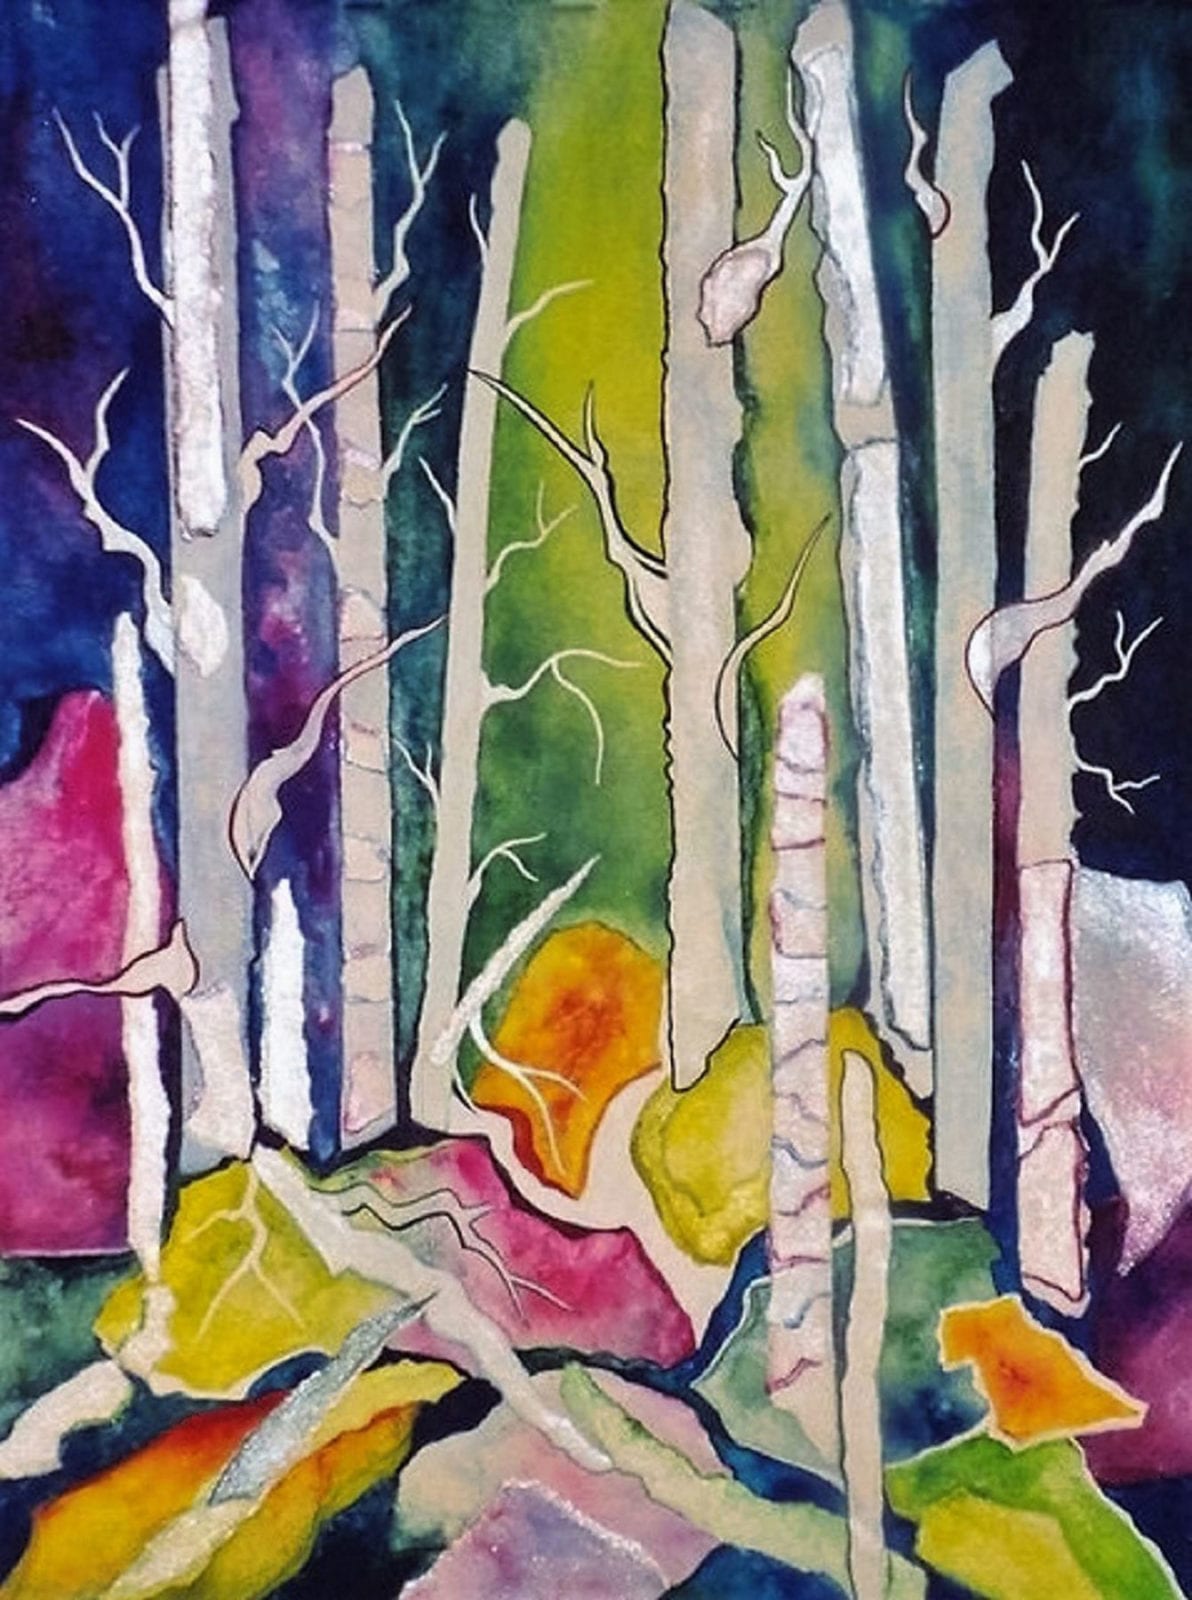 Barbara March, Birch Mountain, watercolor and collage, 24 x 29